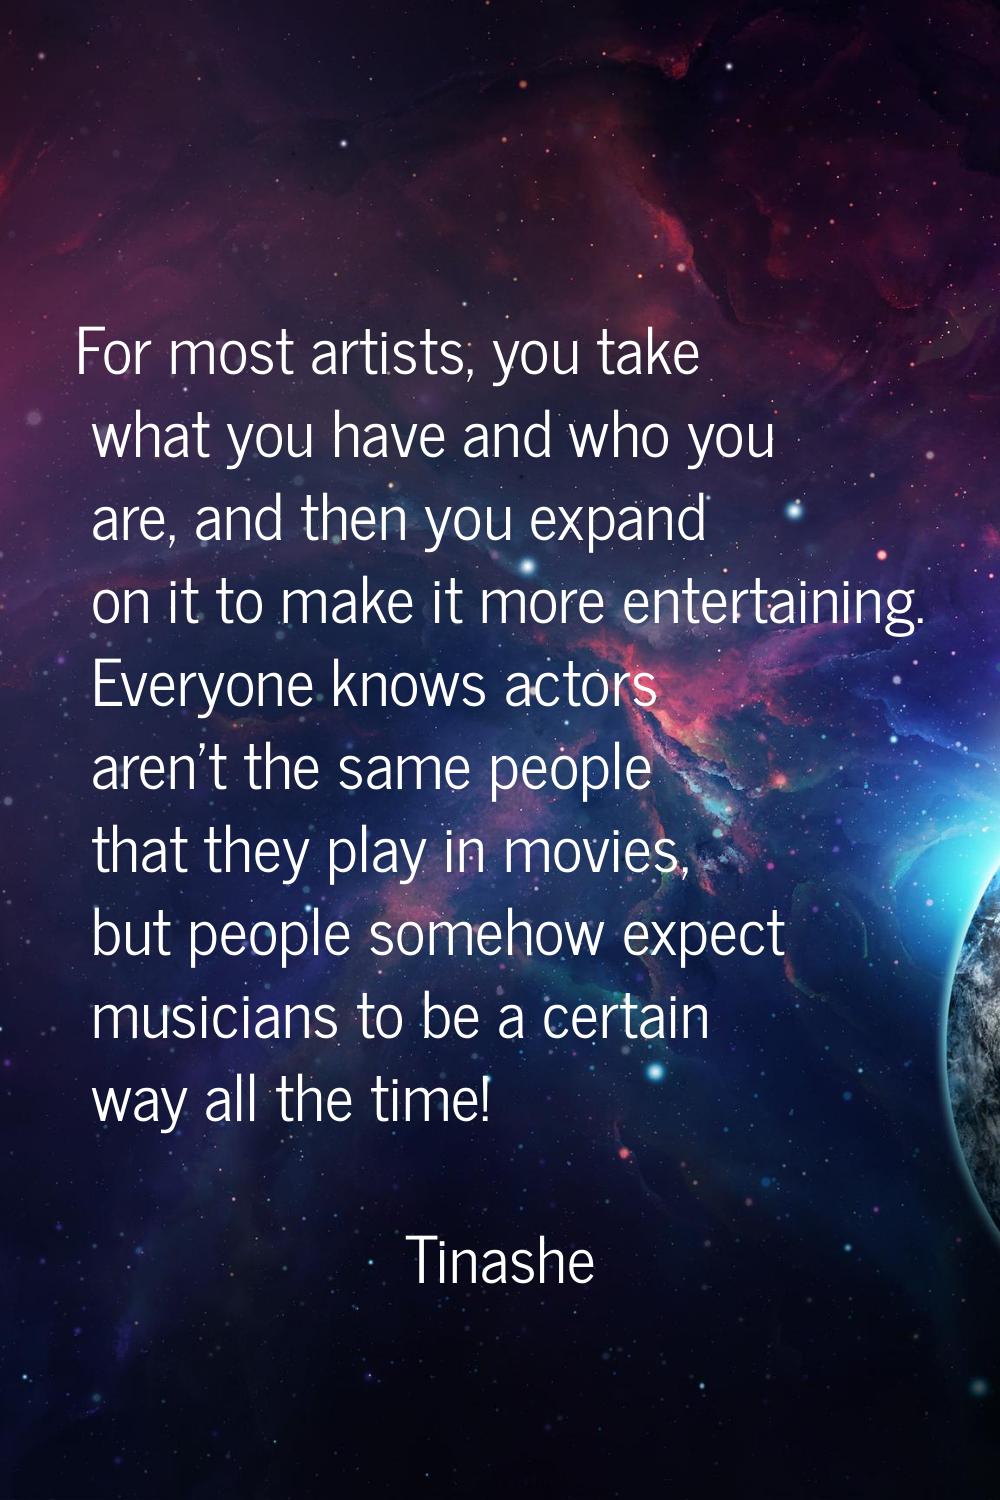 For most artists, you take what you have and who you are, and then you expand on it to make it more